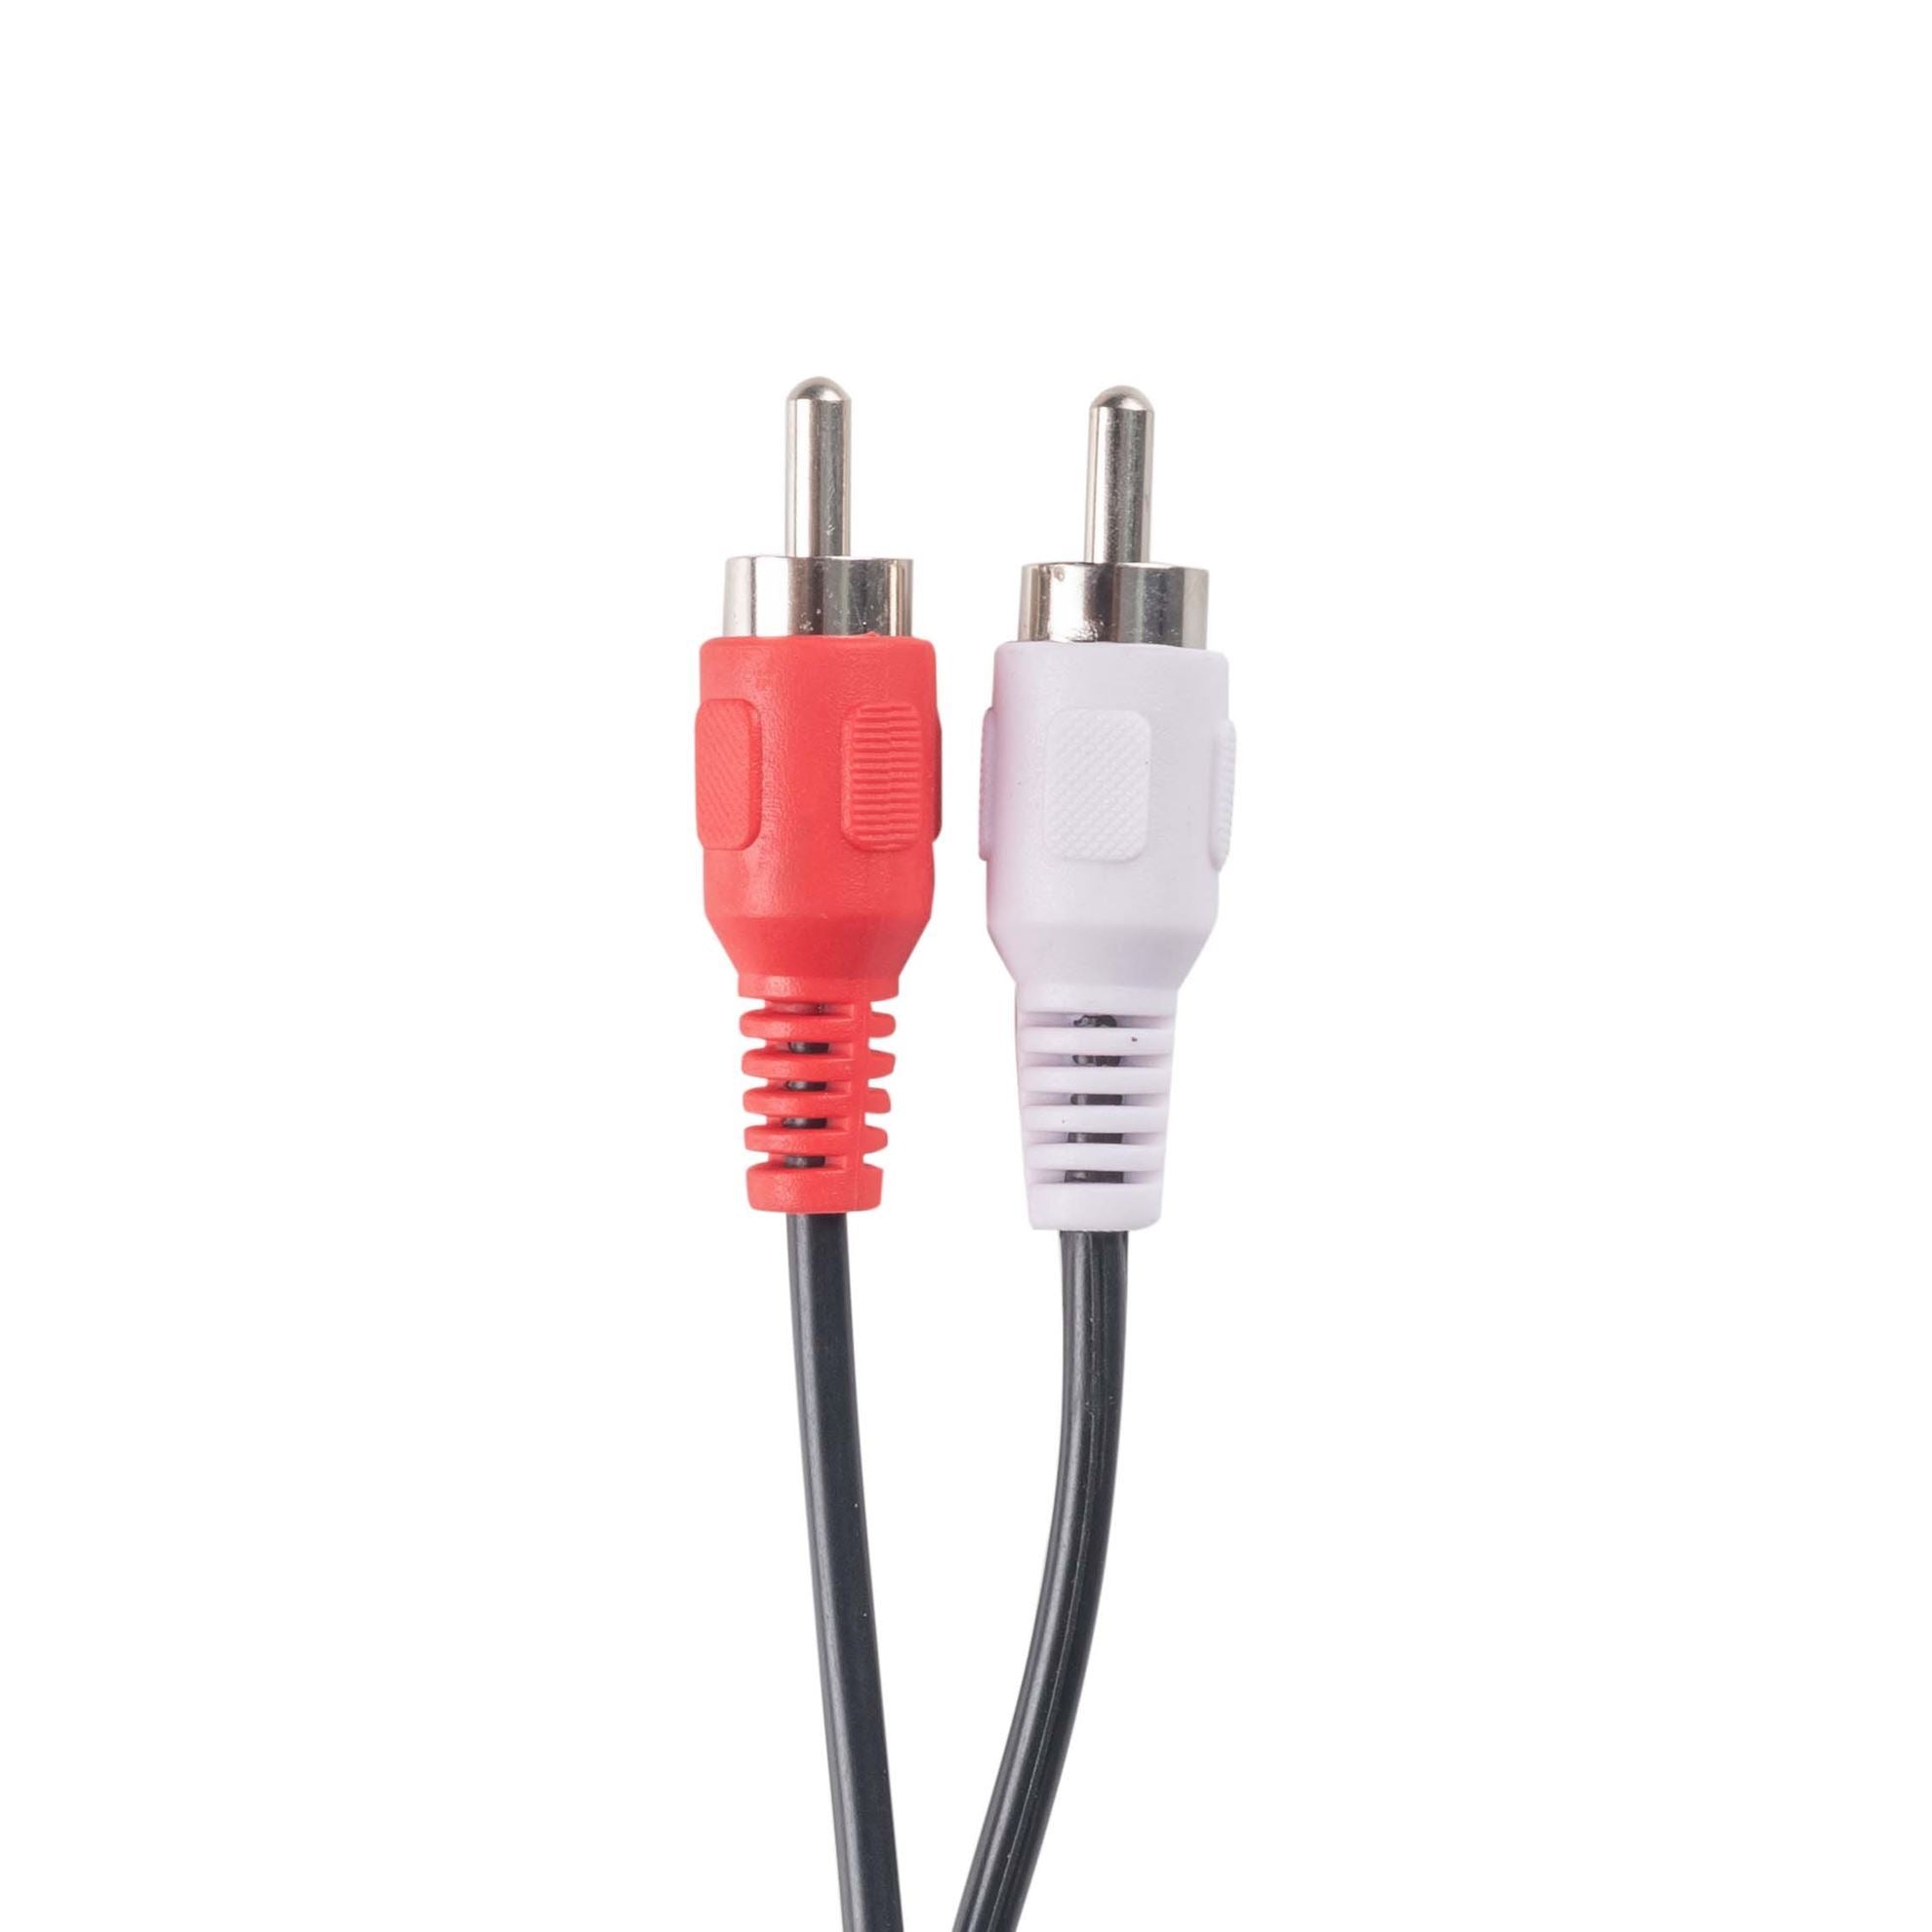 DYNAMIX_20m_RCA_Audio_Cable_2_RCA_to_2_RCA_Plugs,_Coloured_Red_&_White 396